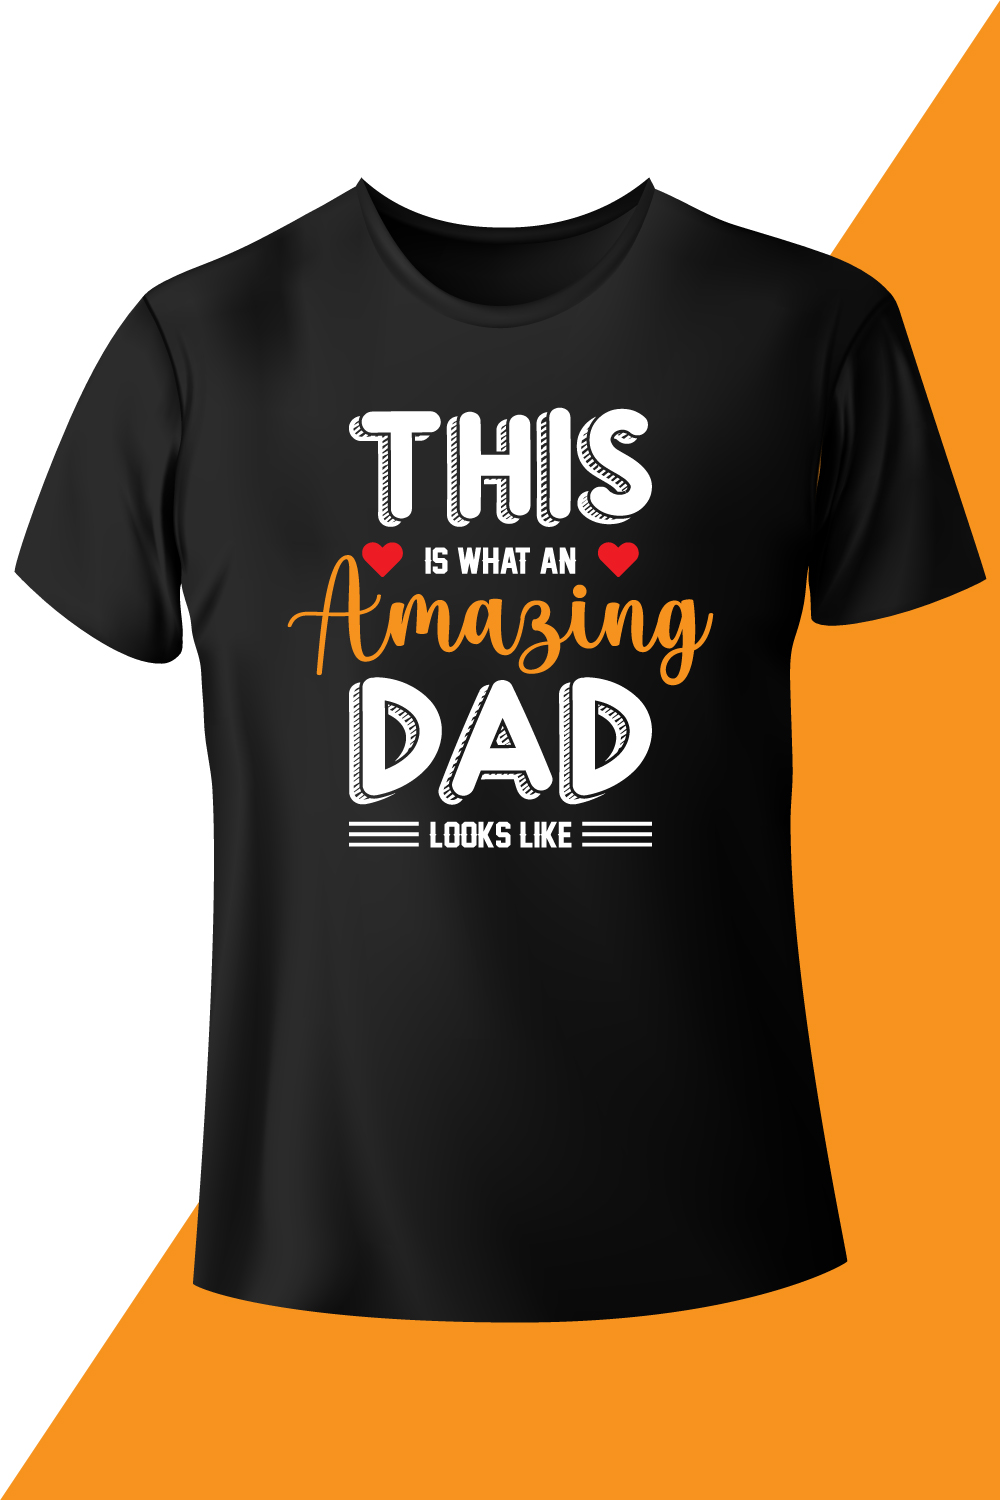 Image of a black t-shirt with an elegant inscription this is what an amazing dad looks like.